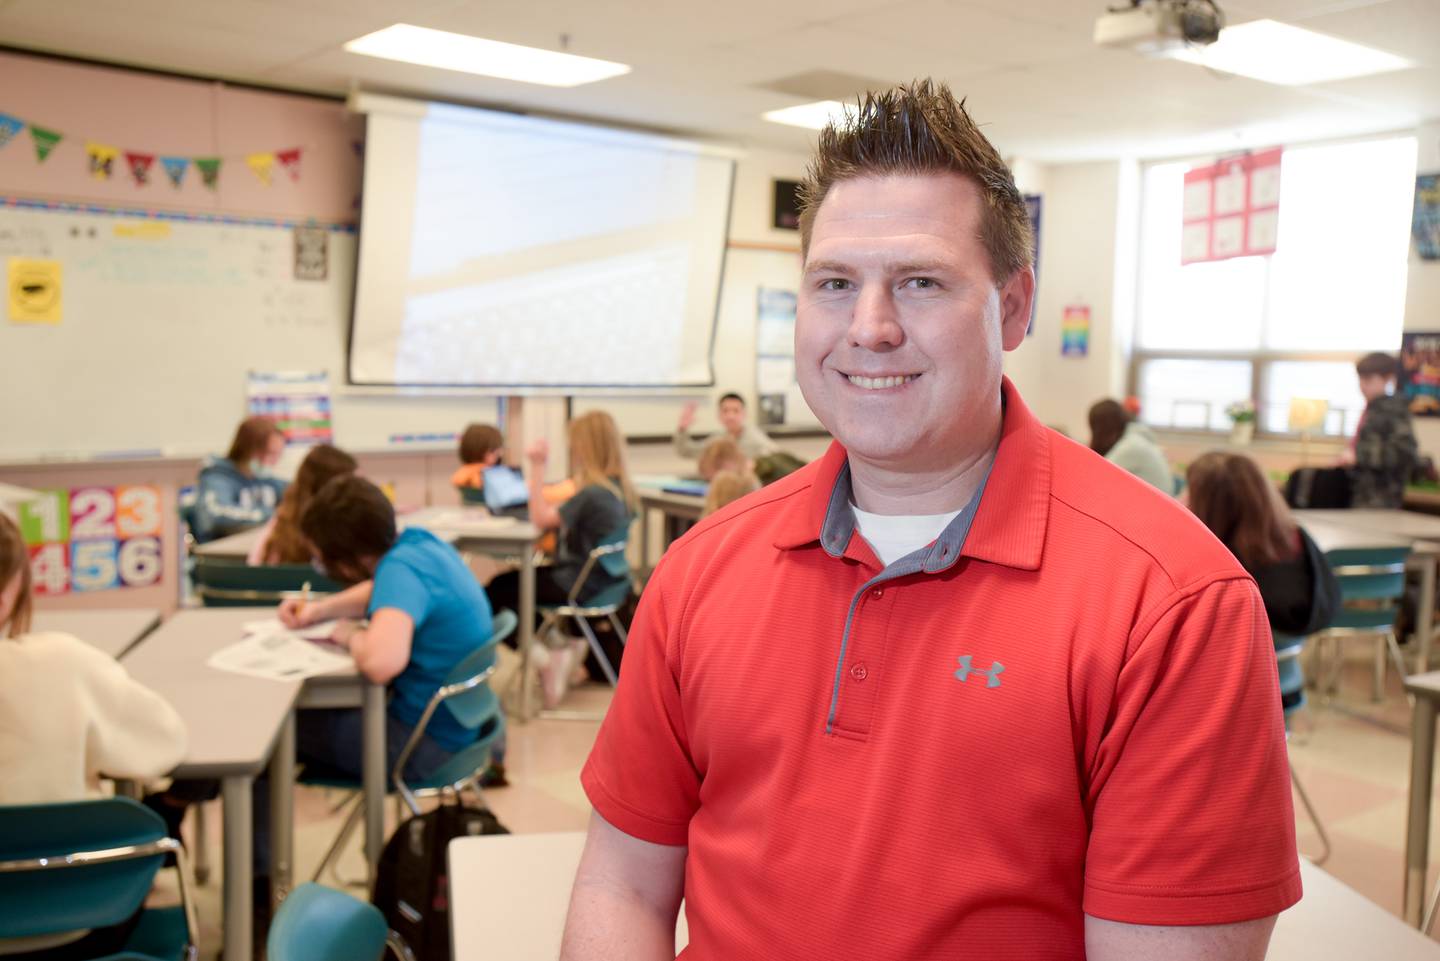 Patrick McGuire, former assistant principal, decided to return to the classroom this year at Wredling Middle School in St. Charles in order to reconnect with students.